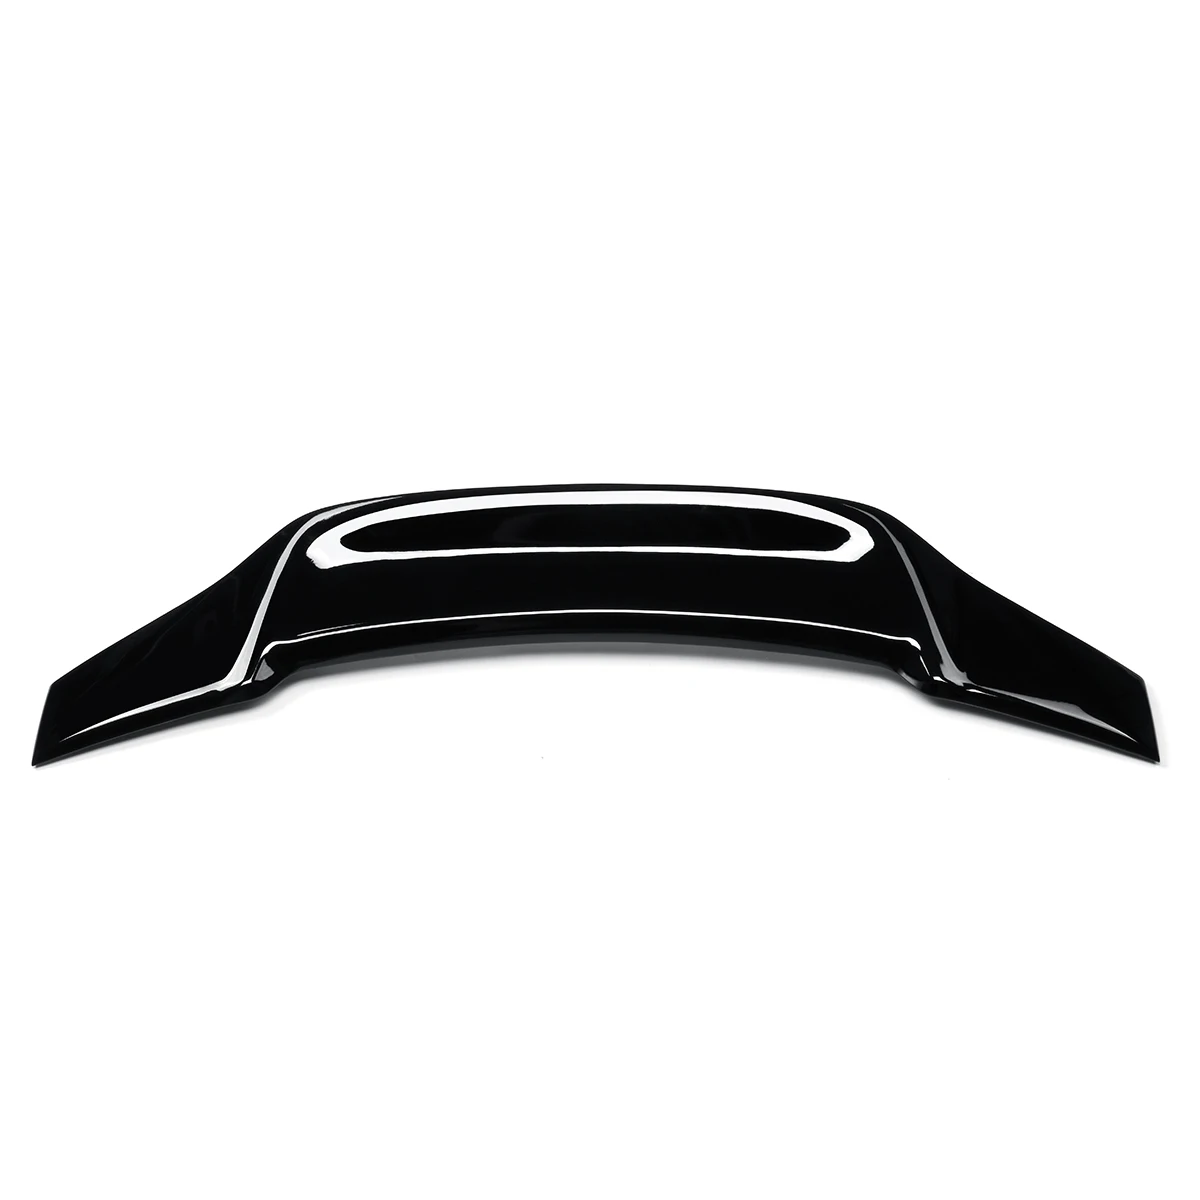 

High Quality IS250 RT Style Car Rear Trunk Spoiler Lip Boot Wing Lip For LEXUS IS250 IS350 ISF 2006-2013 Rear Roof Lip Spoiler